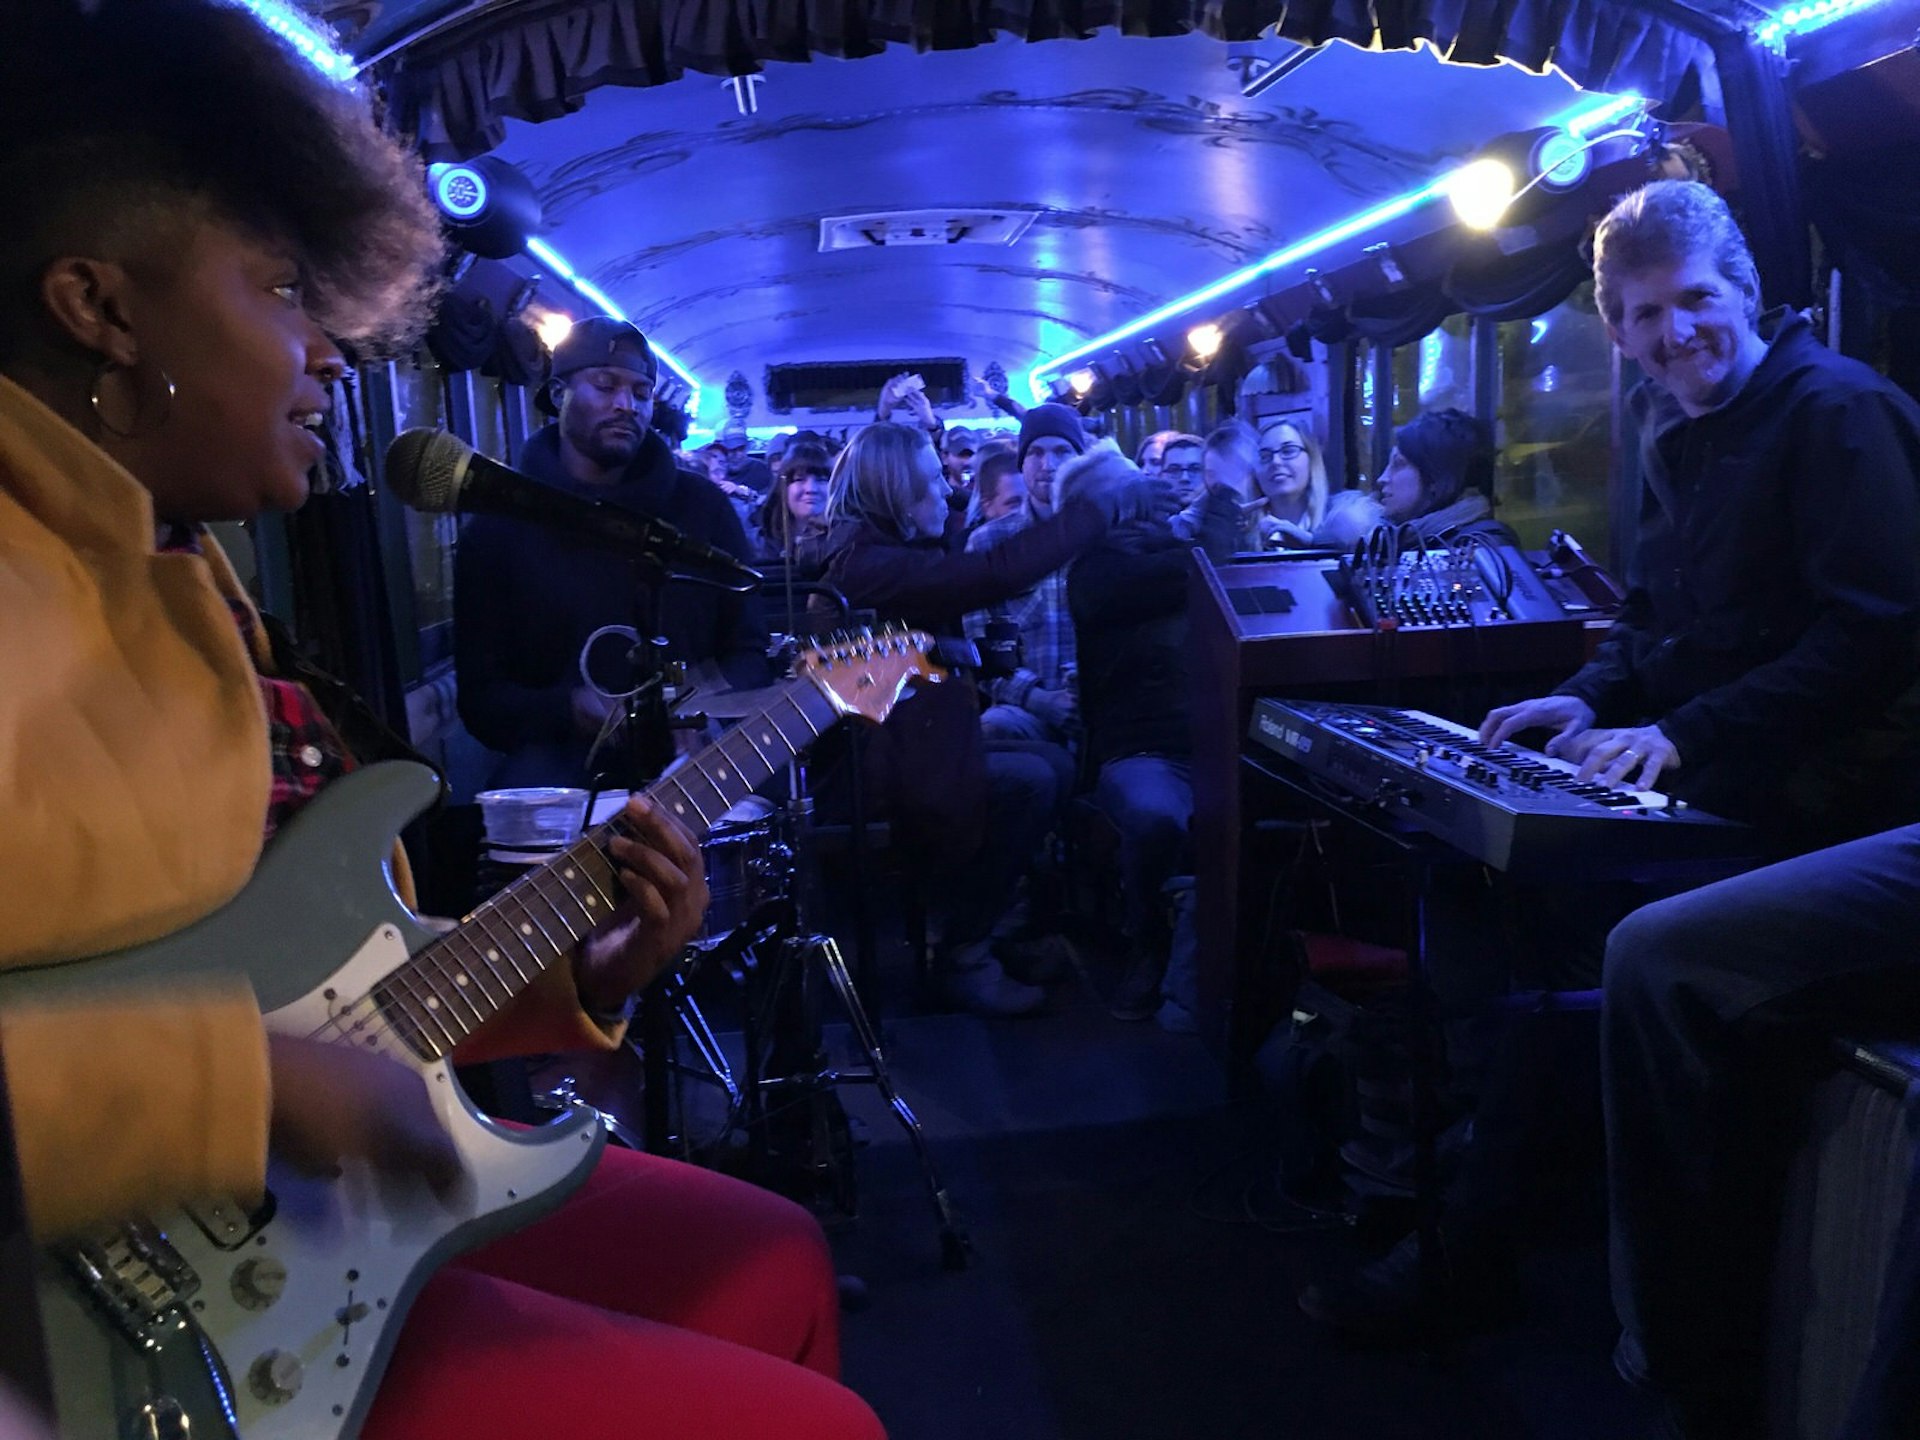 A band, including a woman with electric guitar and microphone, a smiling male keyboardist and a drummer with his eyes closed in concentration, are playing their instruments inside a down-lit bus. Behind them is the audience, crammed into the bus passenger seats. It's LaZoom Band & Beer Bus Tour, a scene in musical city Asheville, North Carolina.